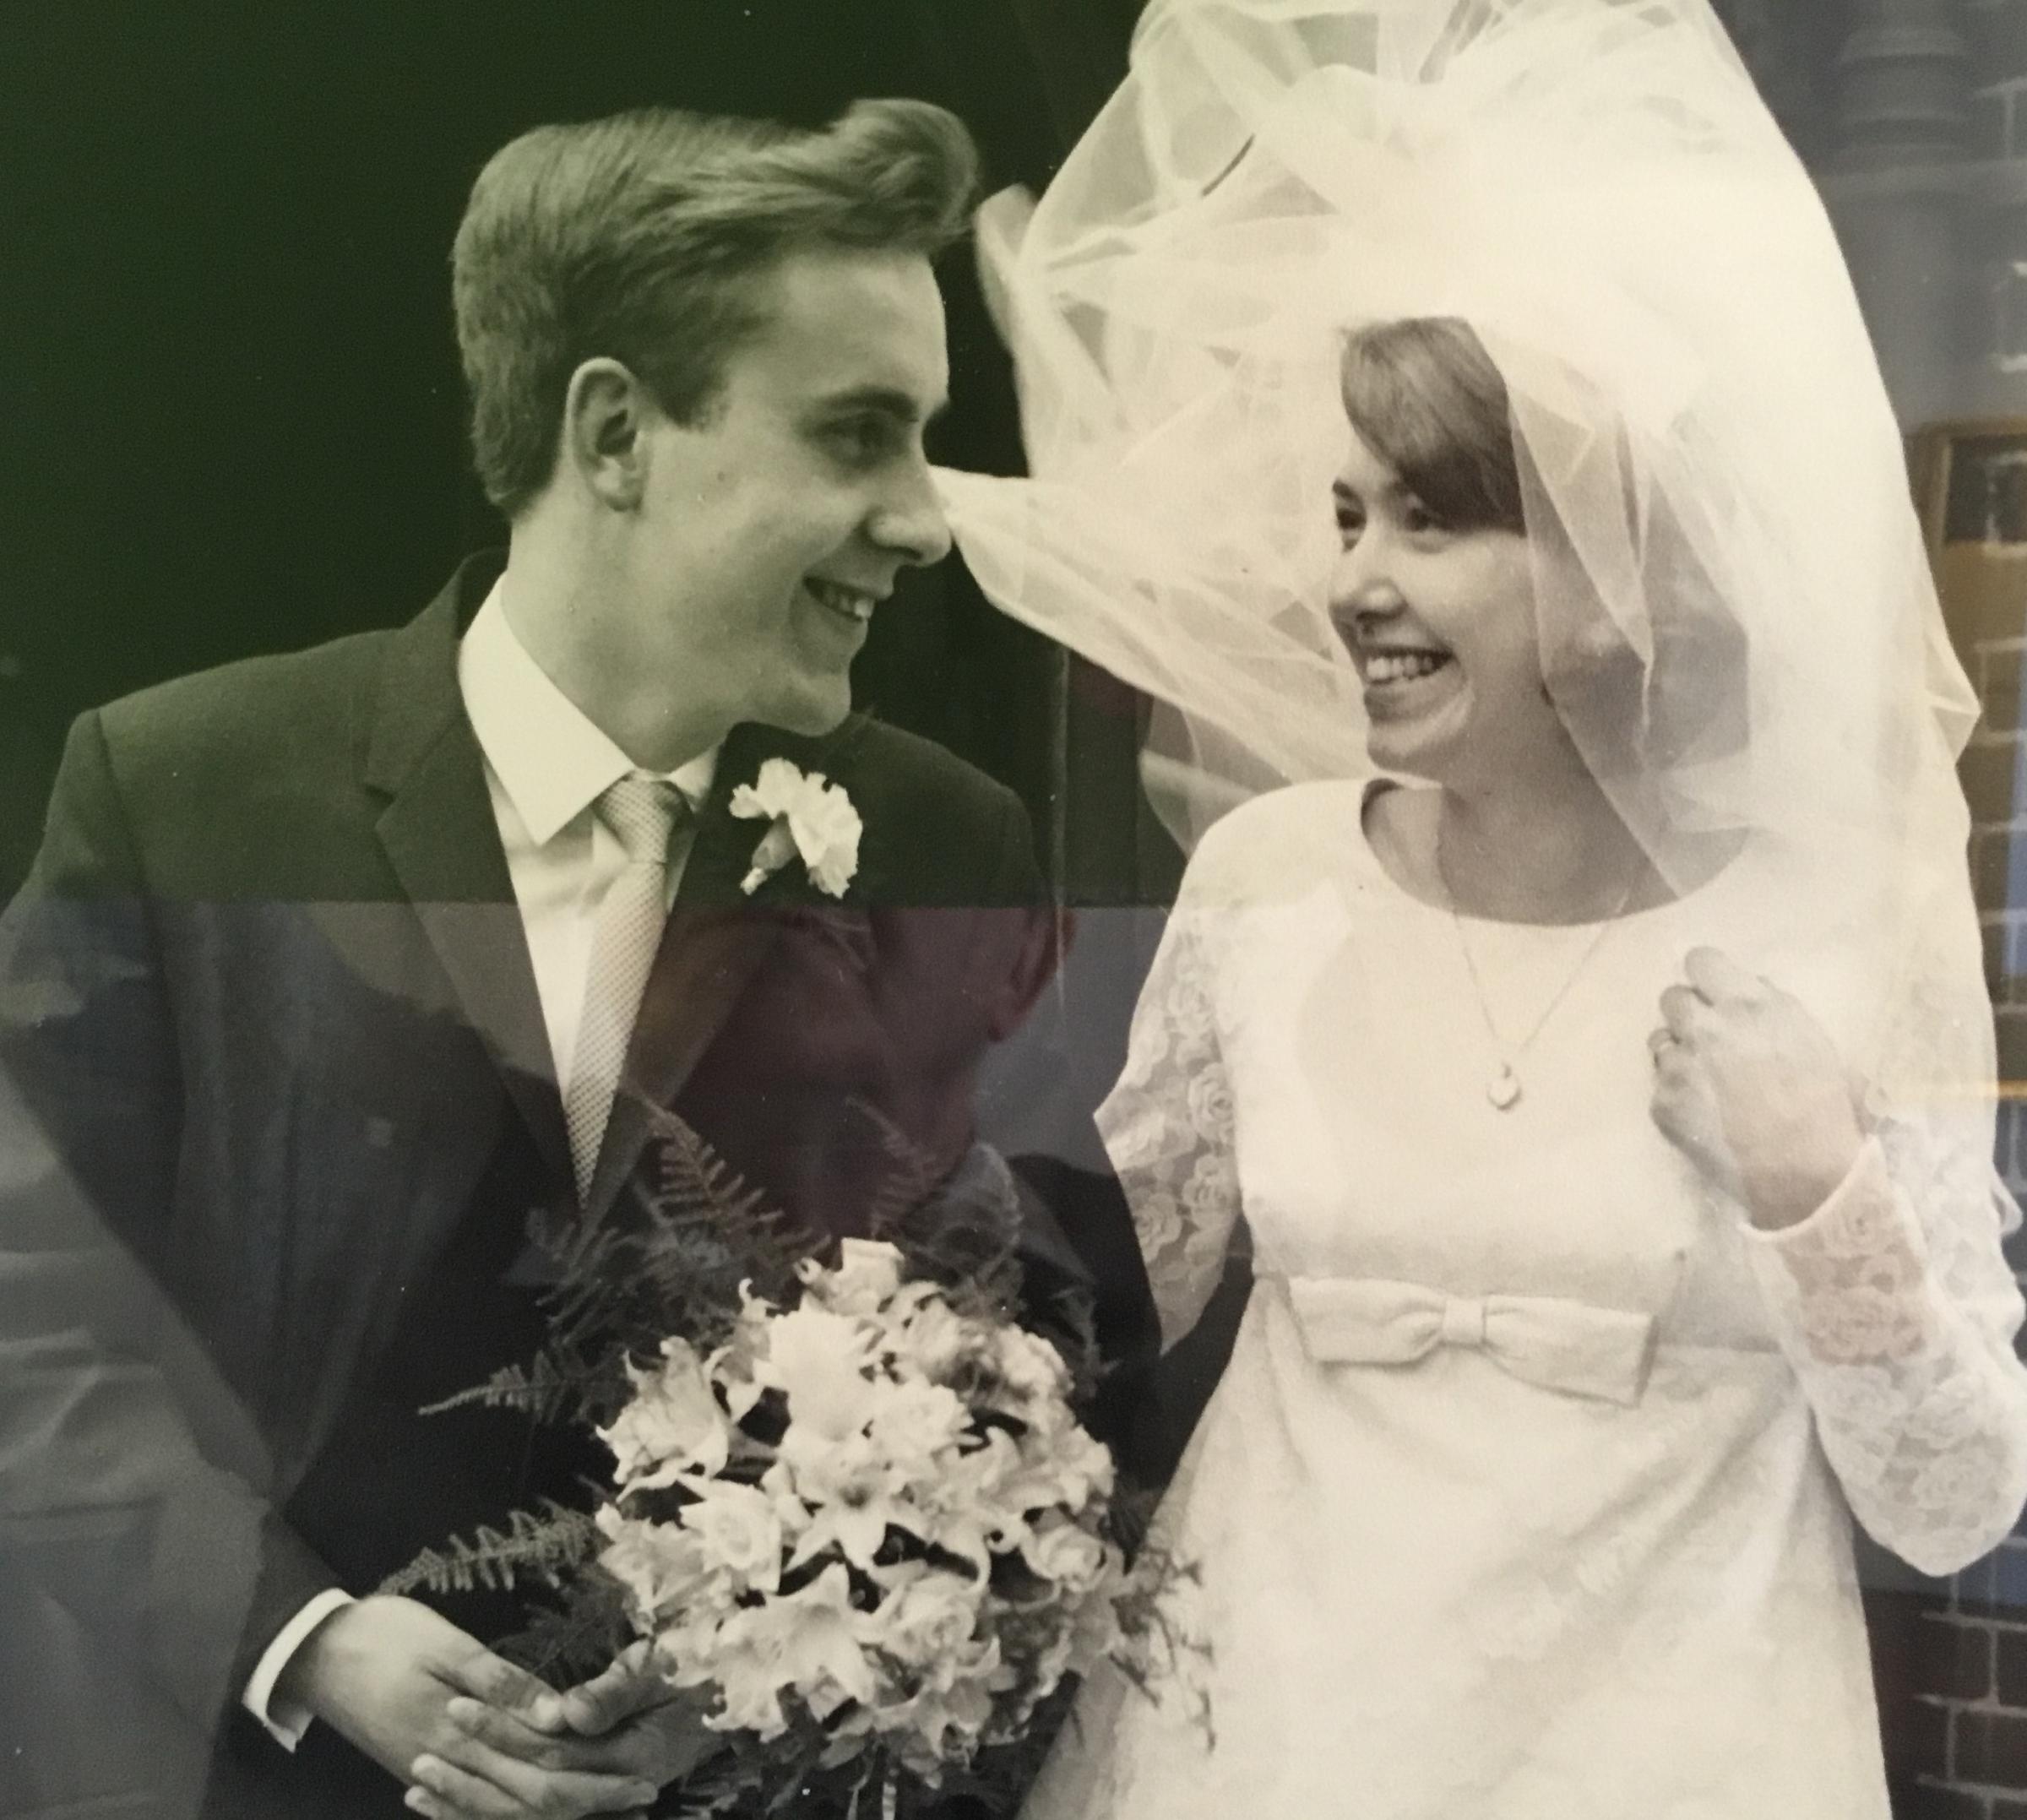 CHILDHOOD SWEETHEARTS: Keith and Carol Roper on their wedding day